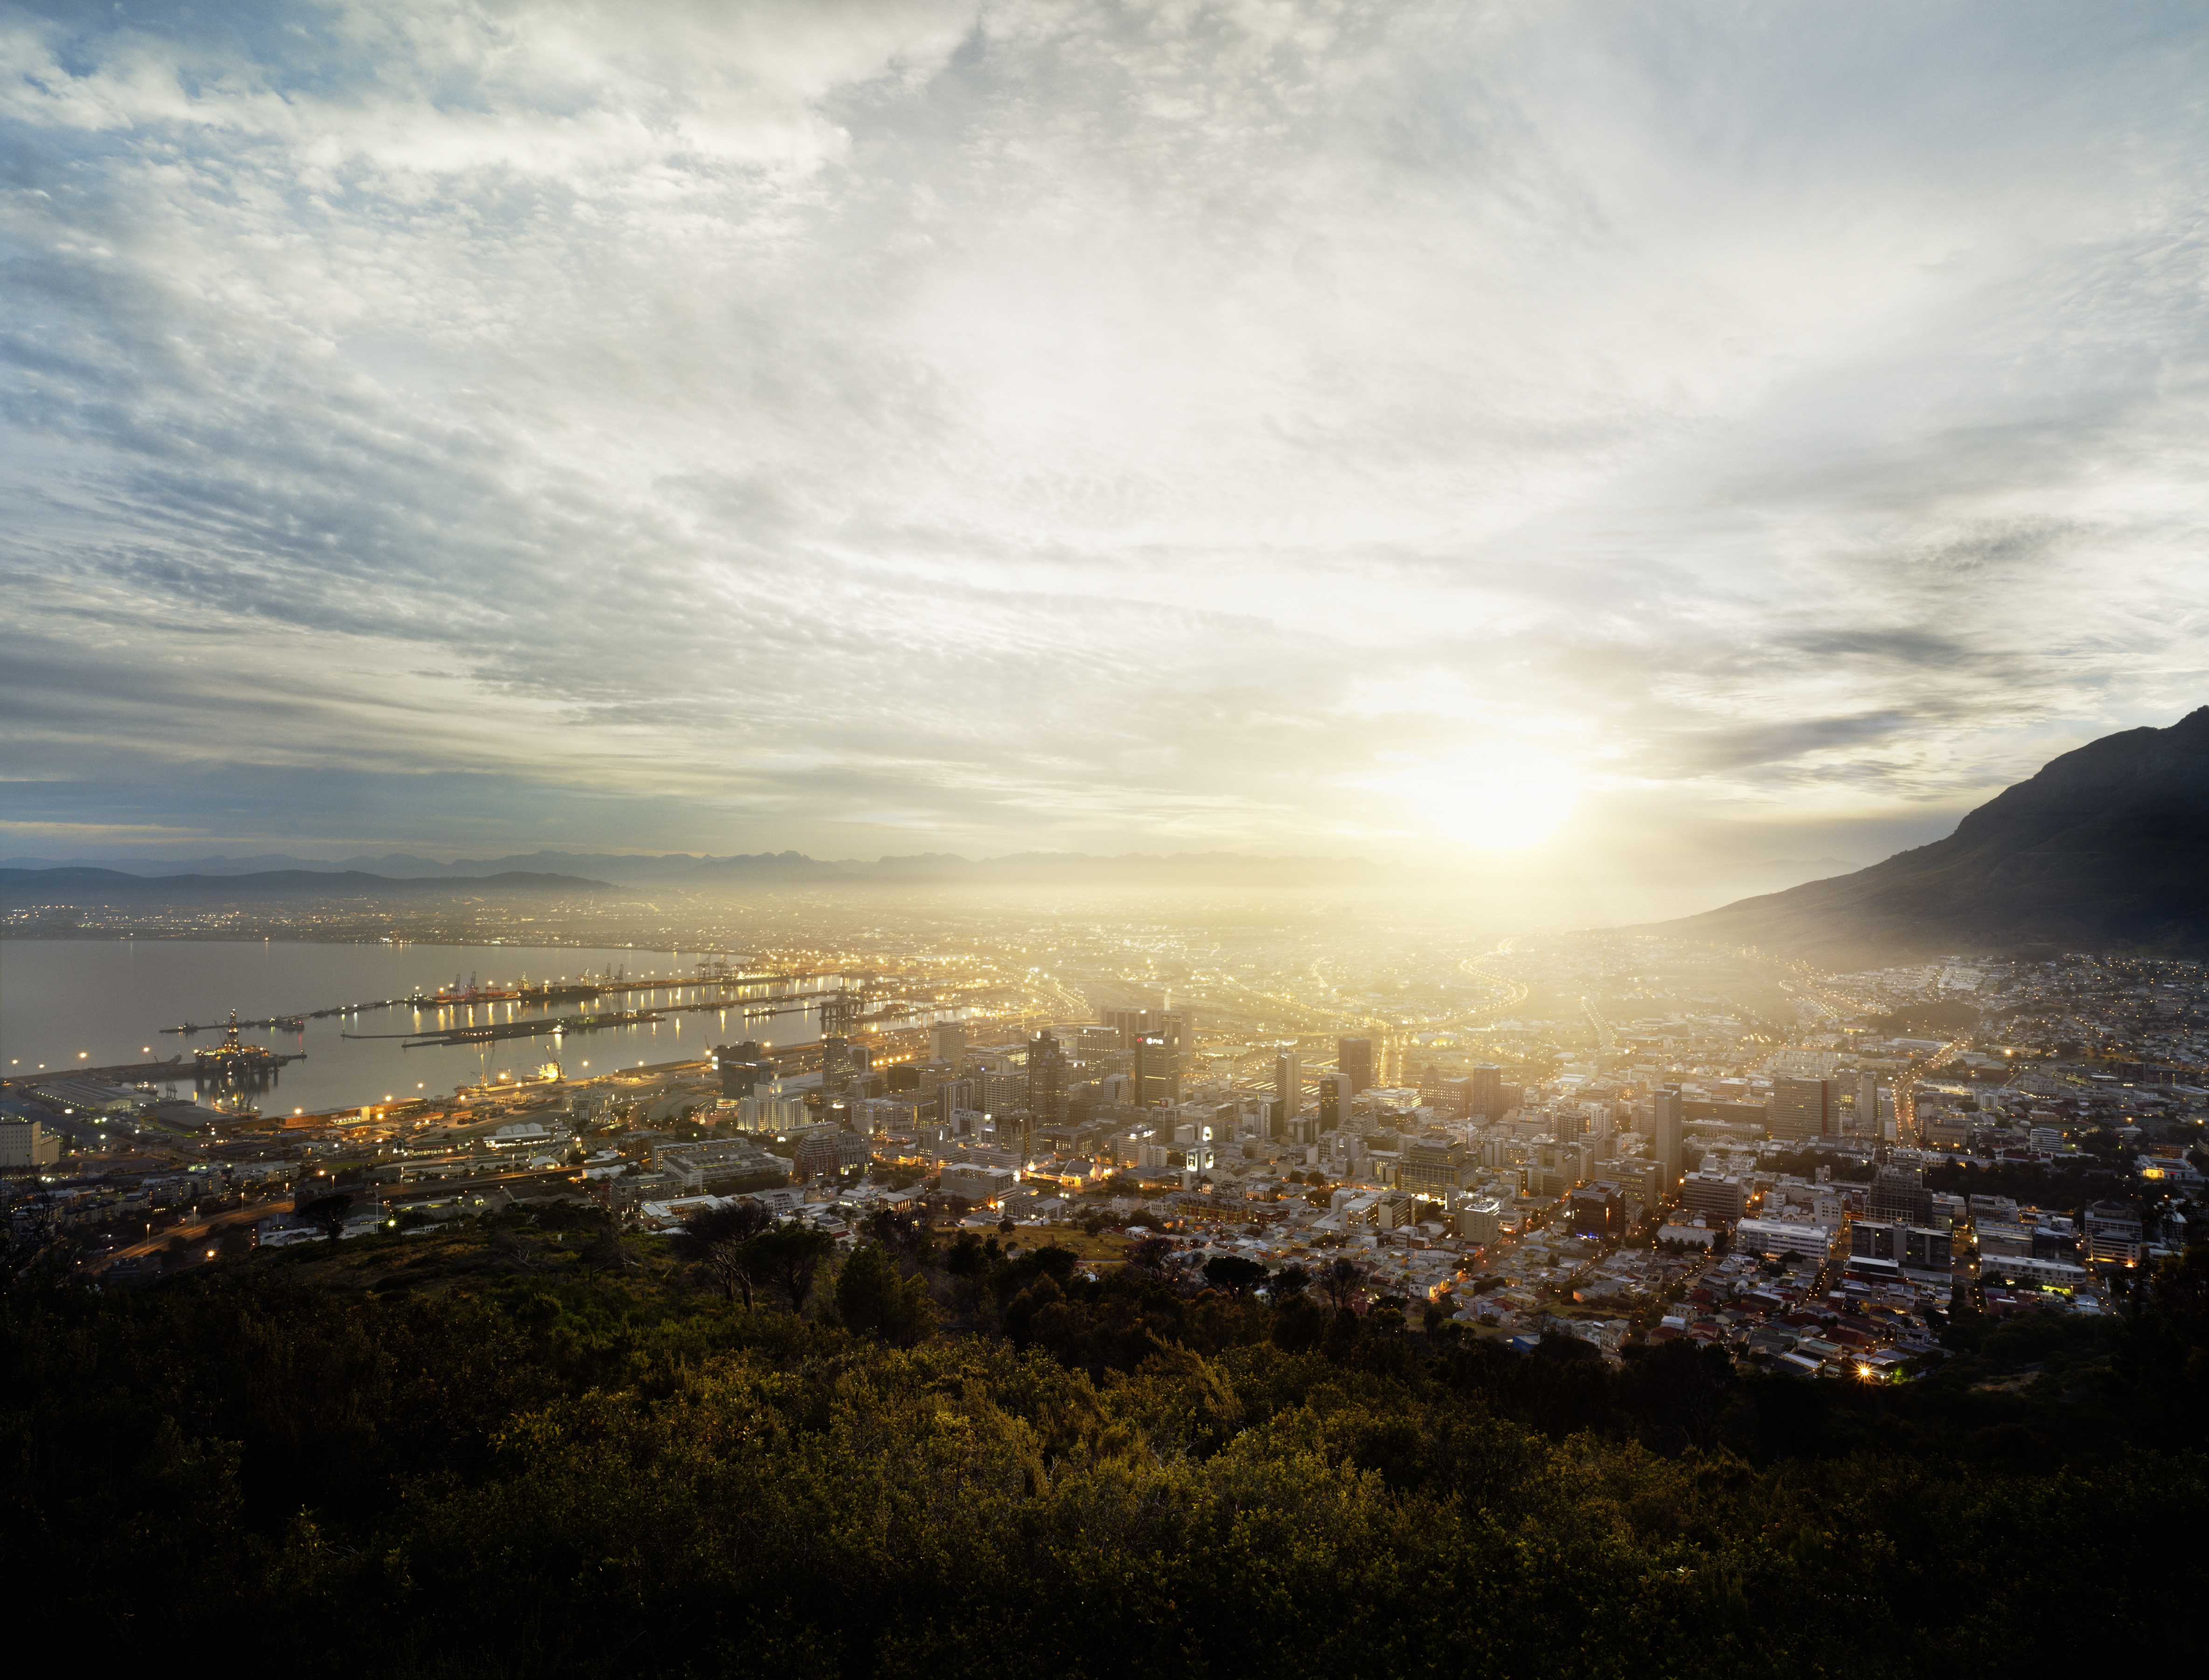 cities, building, fog, hills, hill, cape town, south africa